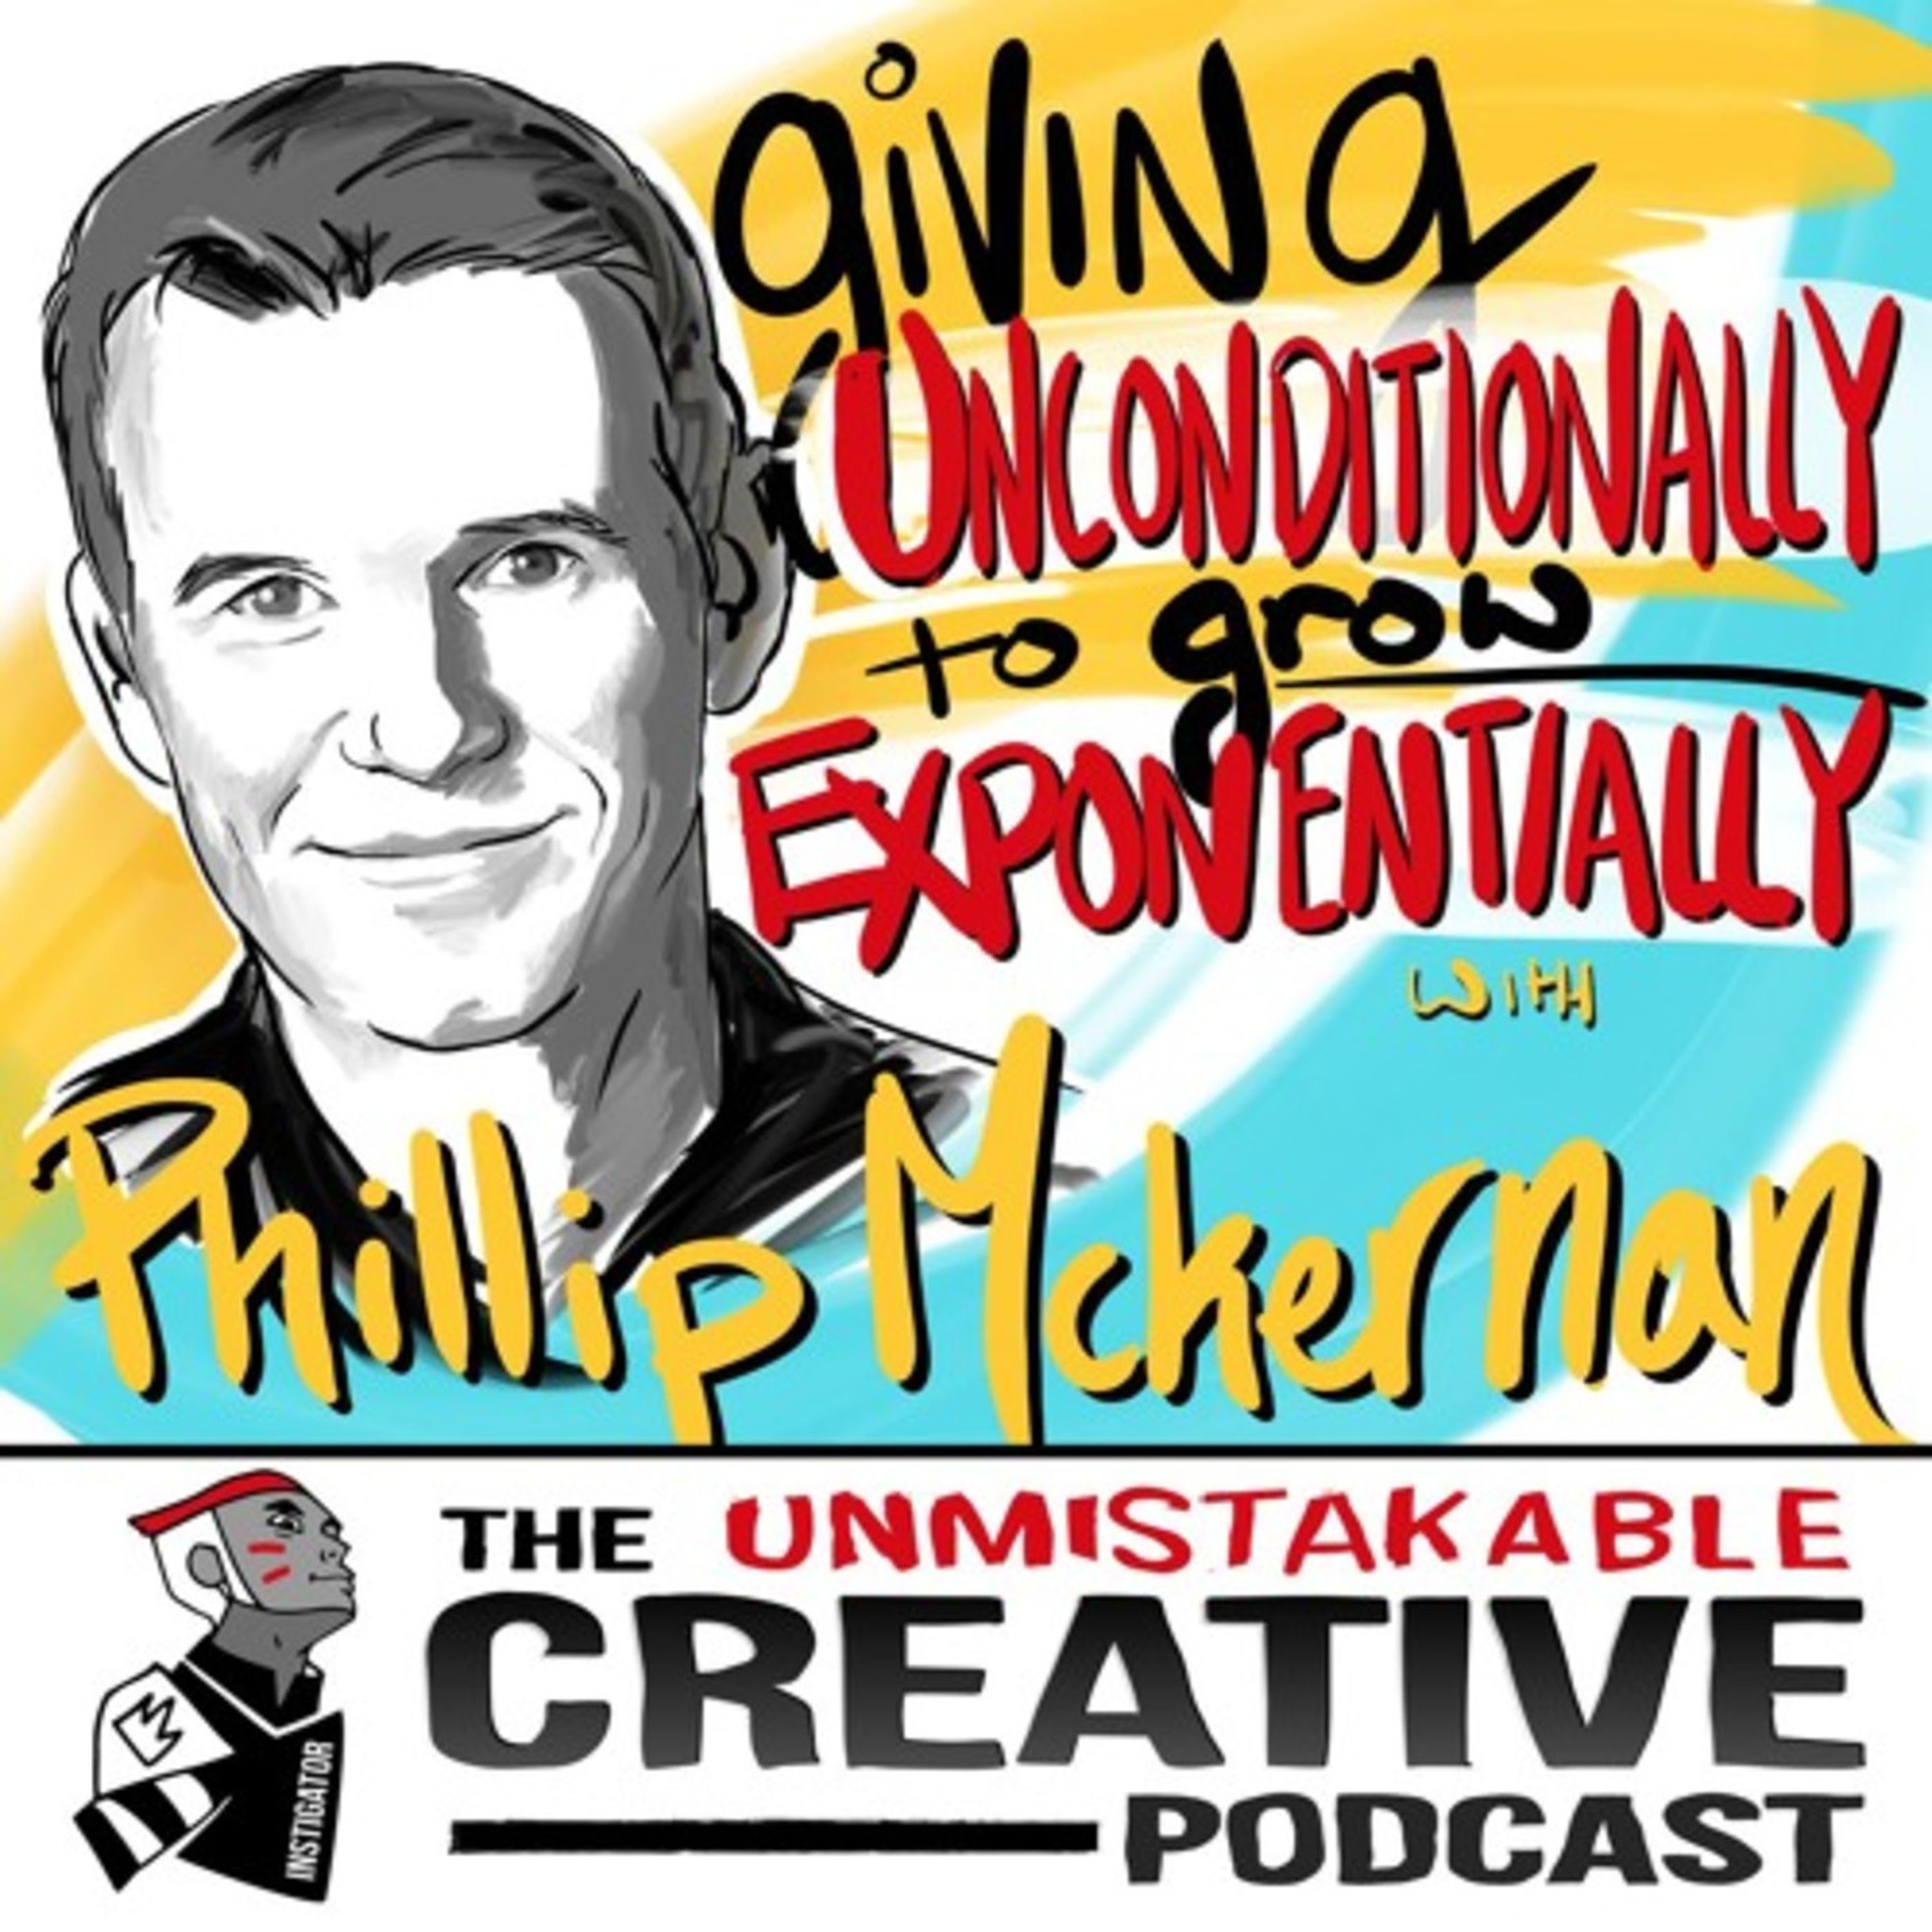 Giving Unconditionally to Grow Exponentially with Phillip Mckernan Image